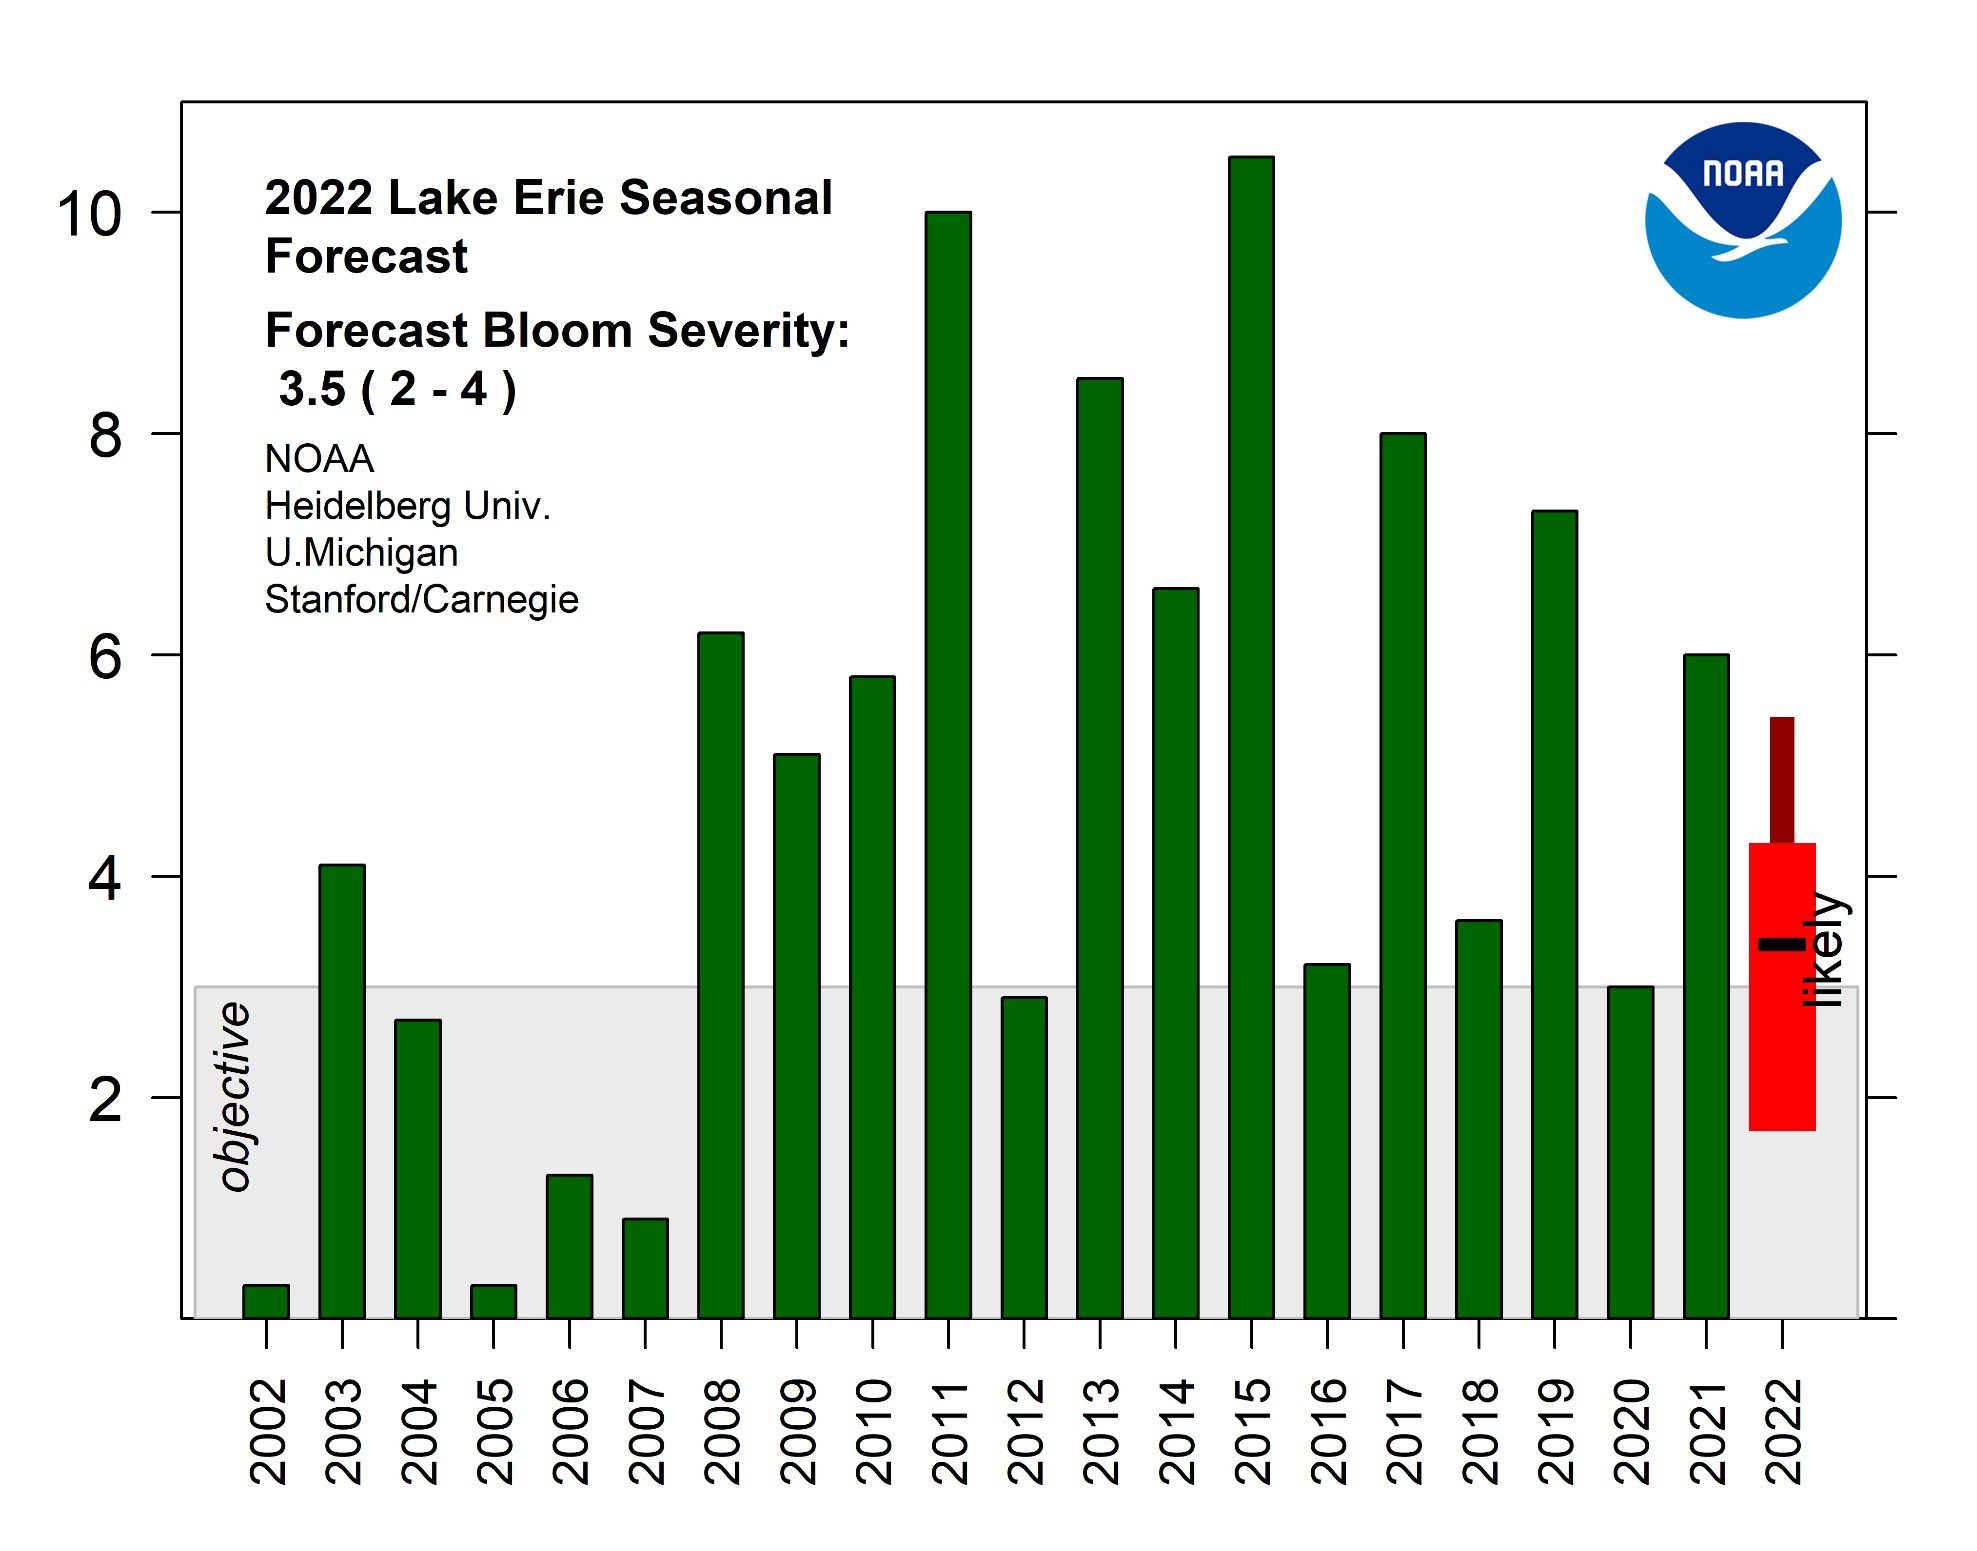 Graph showing bloom severity index for 2002-2021, and the forecast for 2022. The index is based on the amount of biomass over the peak 30-days.